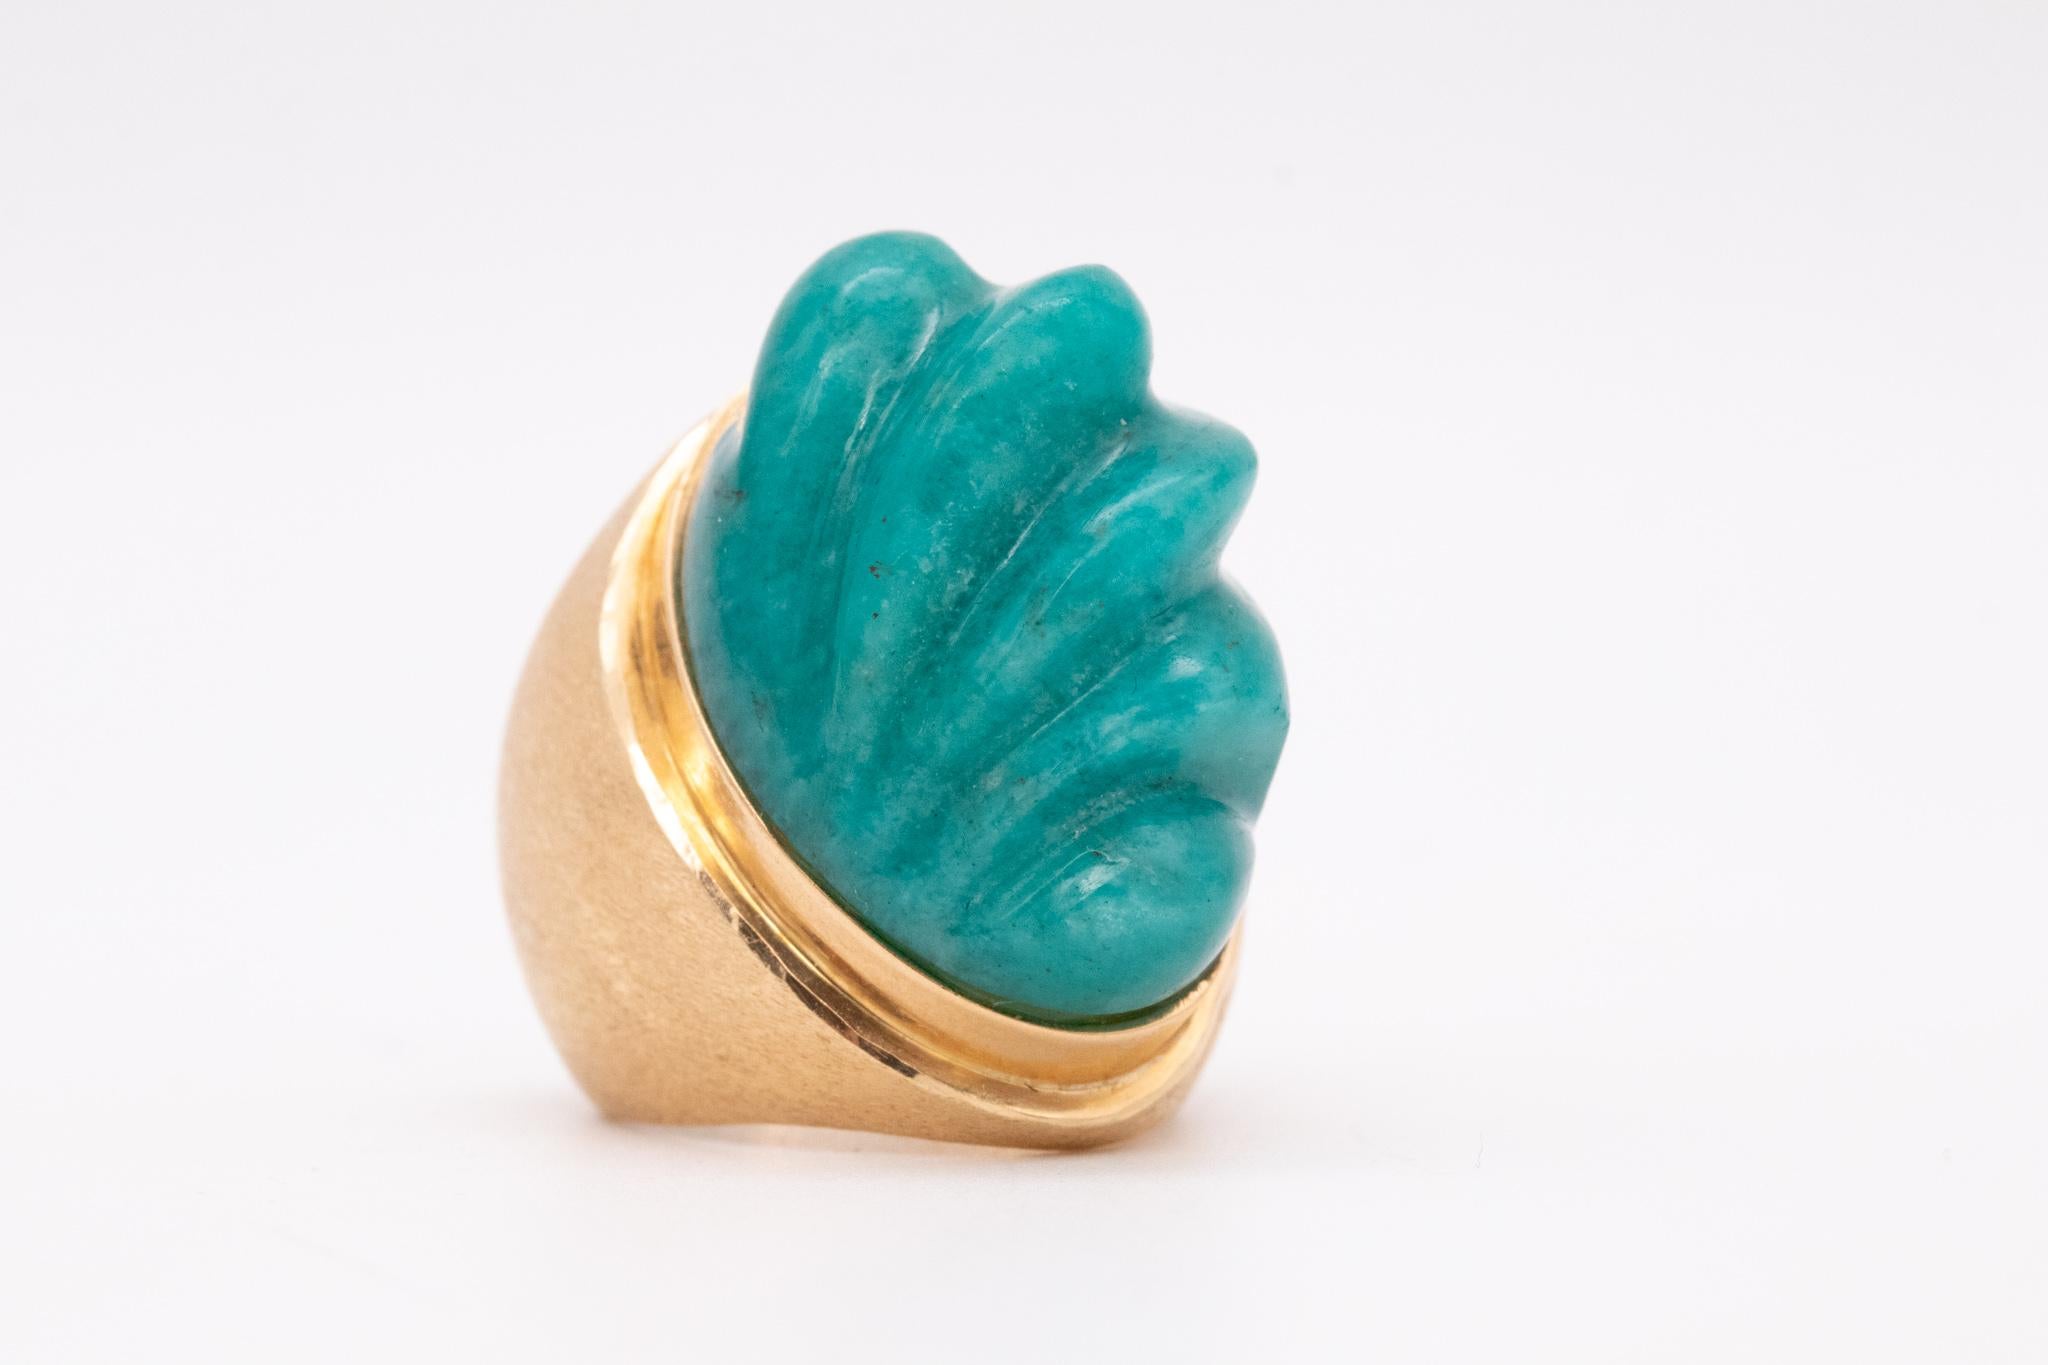 Modernist Burle Marx 1960 Brazil 18kt Yellow Gold Forma Livre Ring with 38 Ct in Amazonite